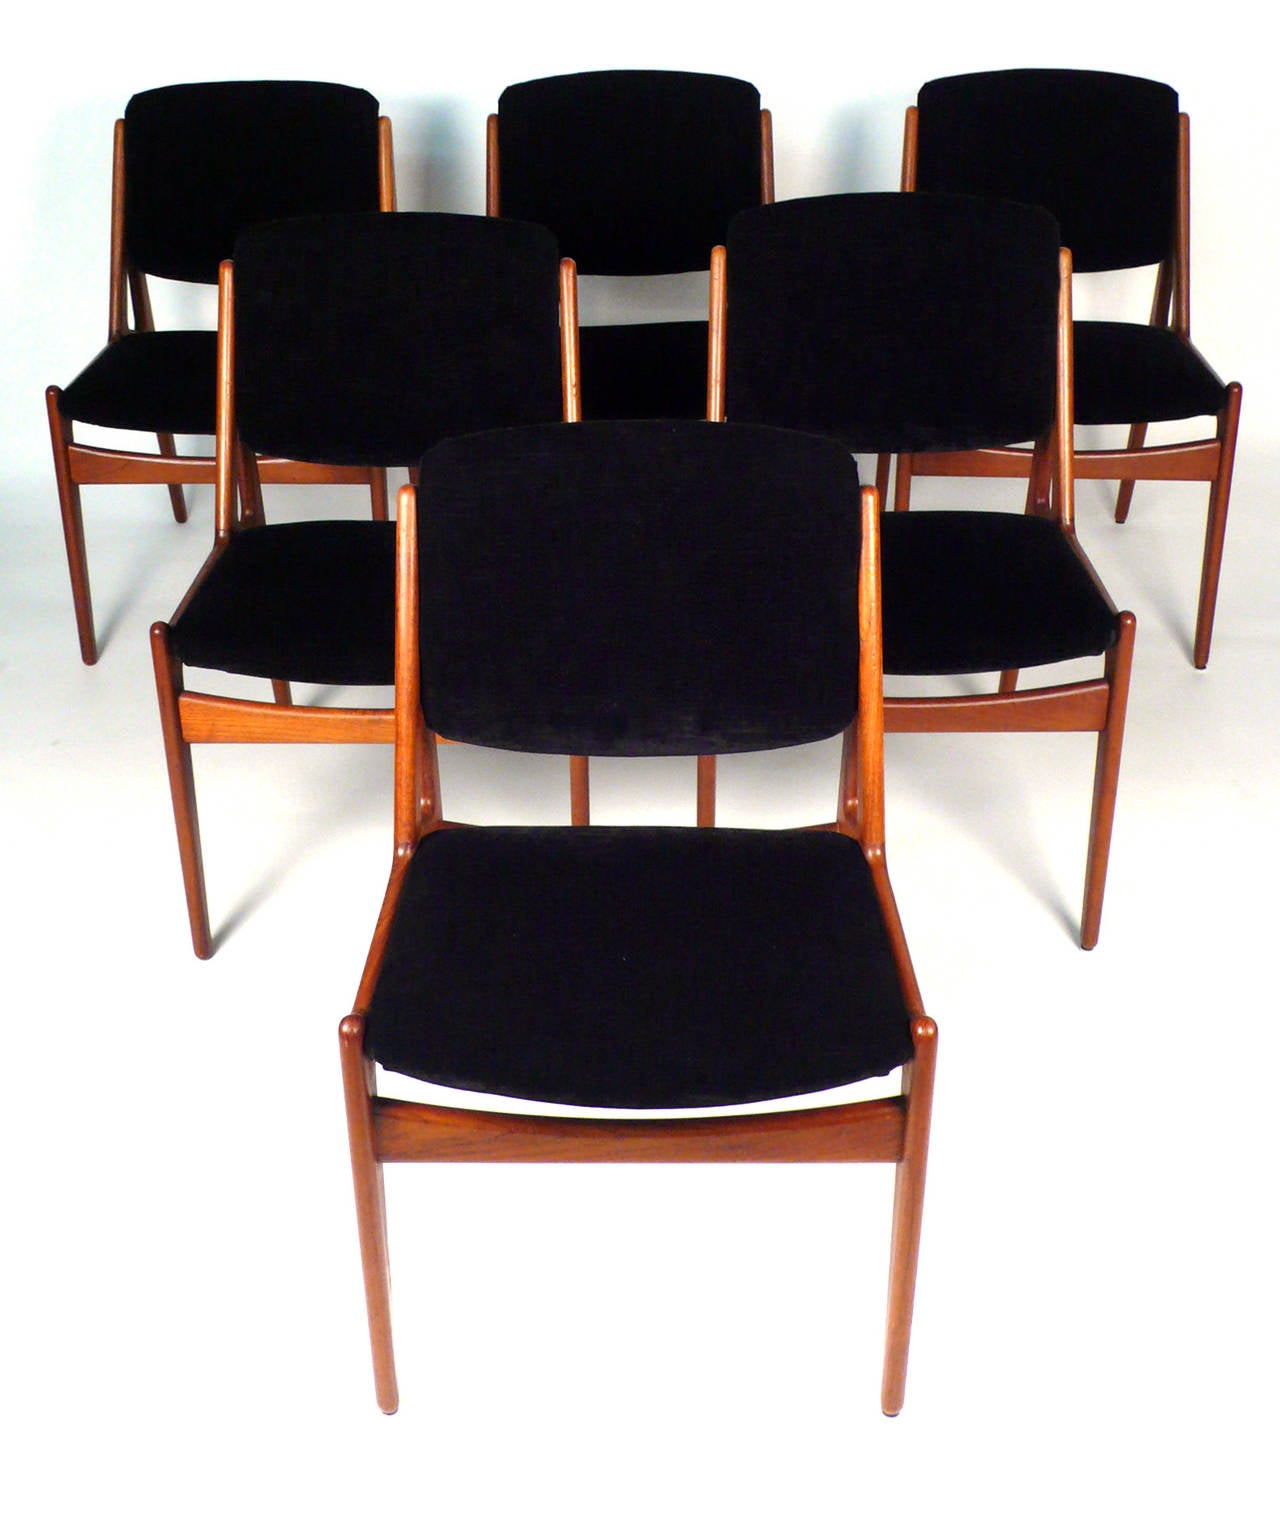 Set of eight 'Lene' chairs by Arne Vodder for Vamo Mobelfabrik, this grouping consists of six side chairs and two arm chairs. Quite a comfortable and ergonomic design. Side chairs measure 18.5